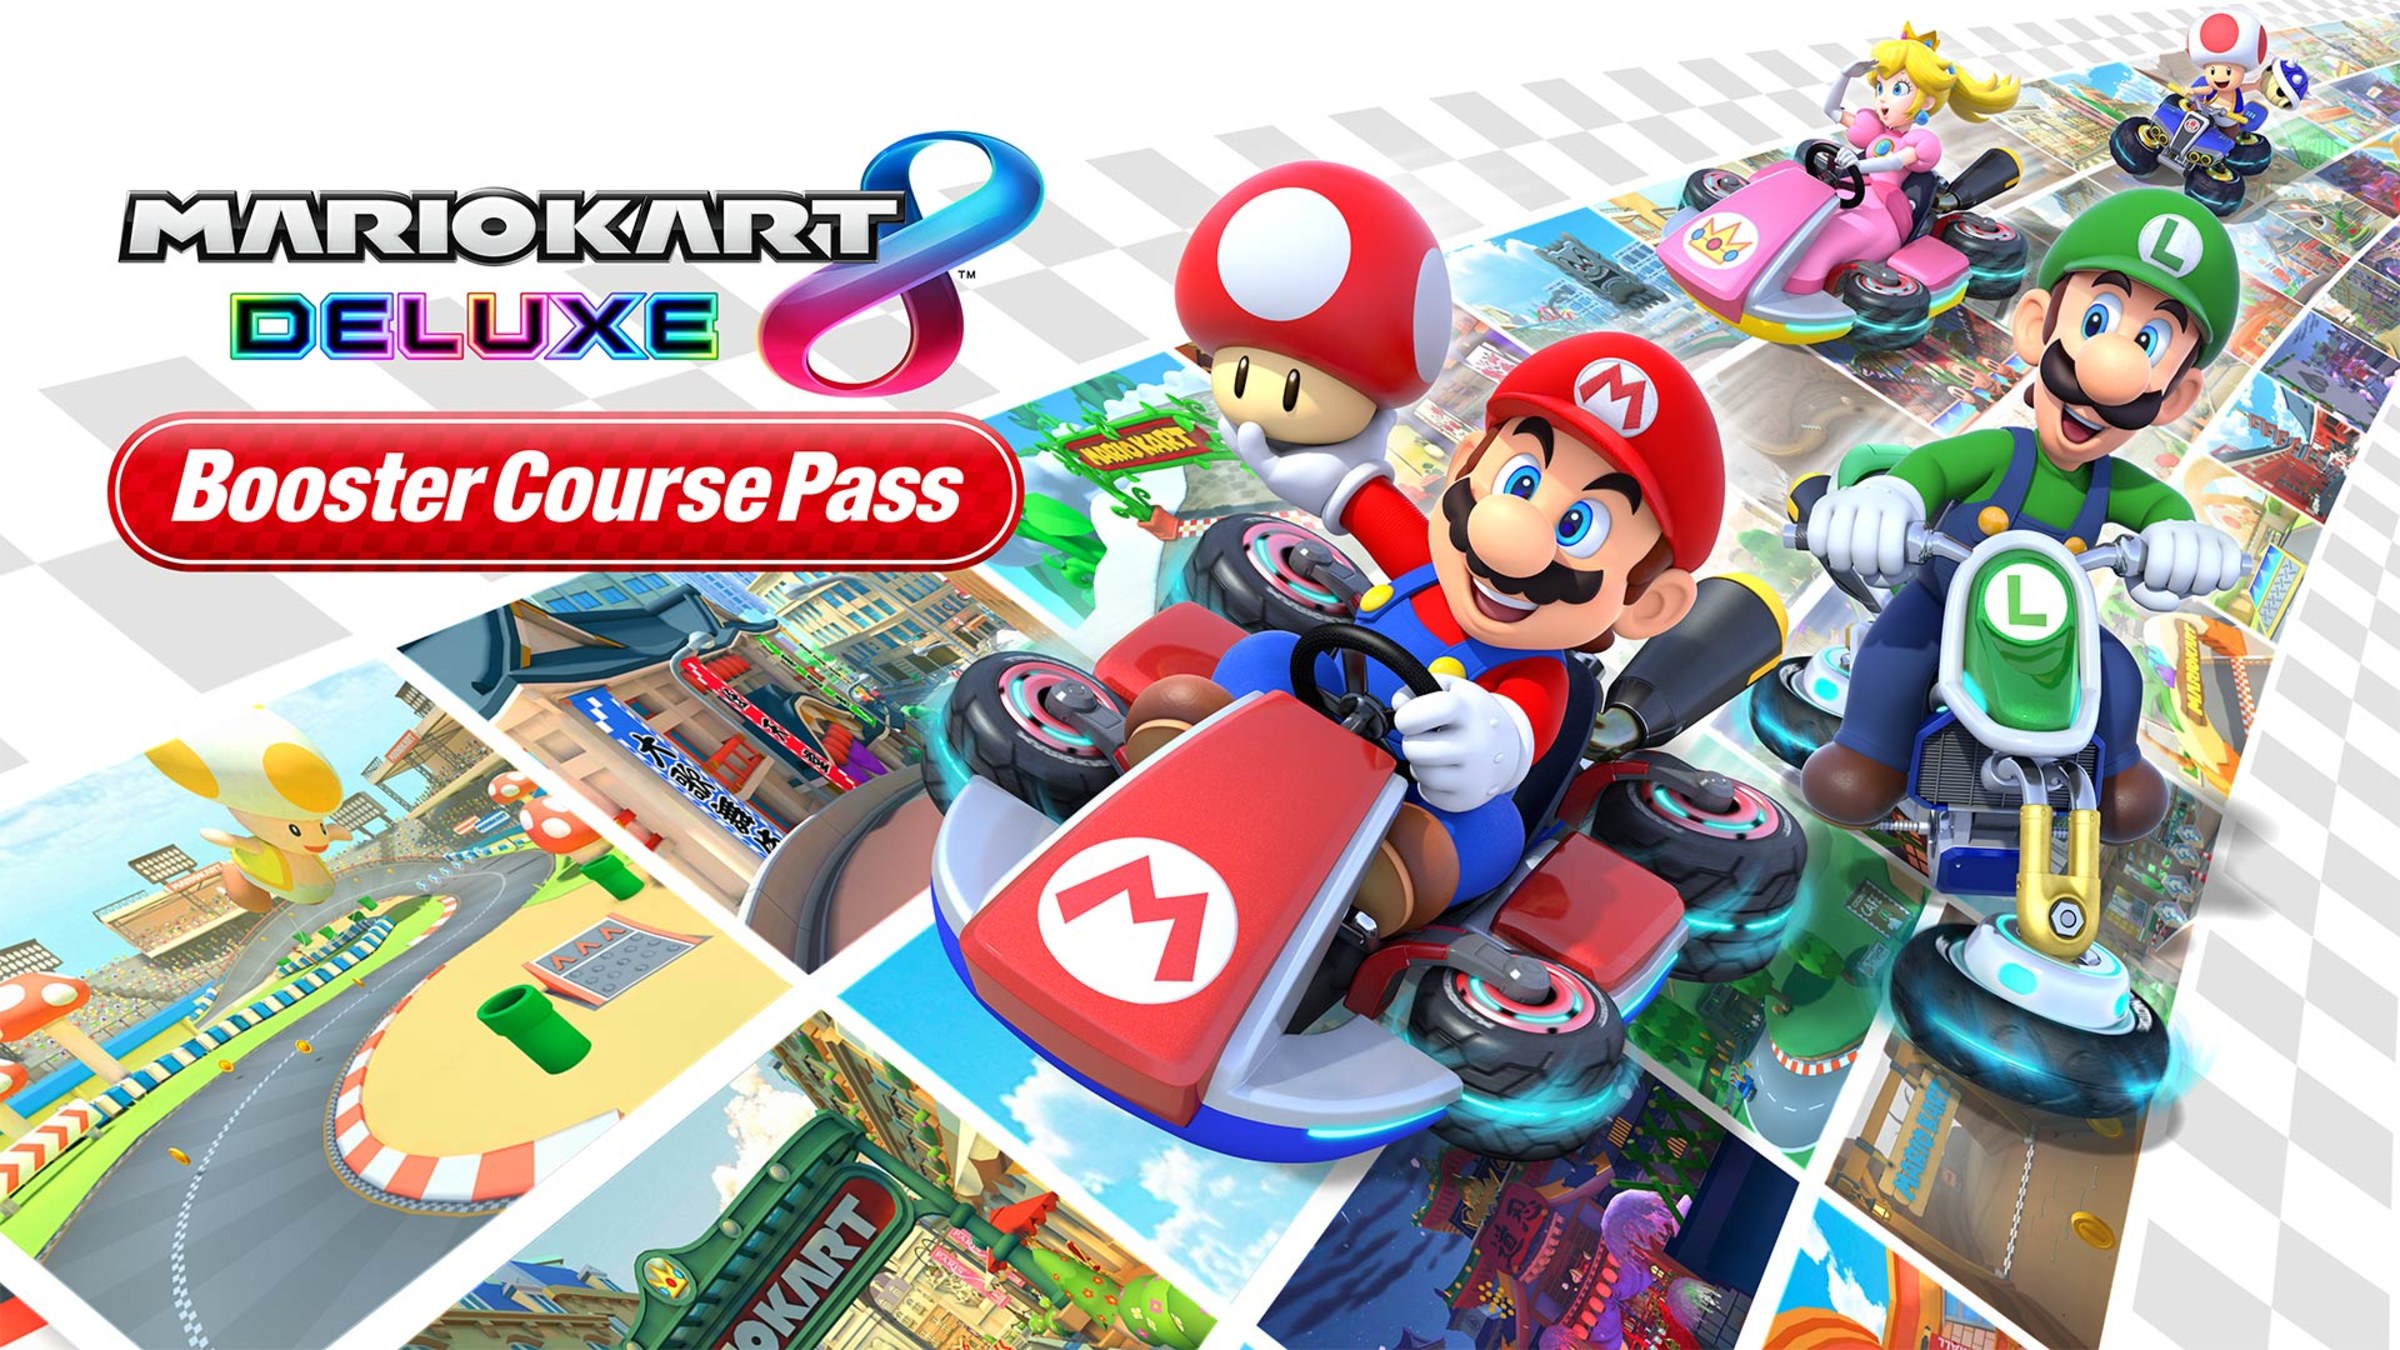 Mario Kart™ 8 Deluxe – Booster Course Pass for Nintendo Switch - Nintendo Official Site